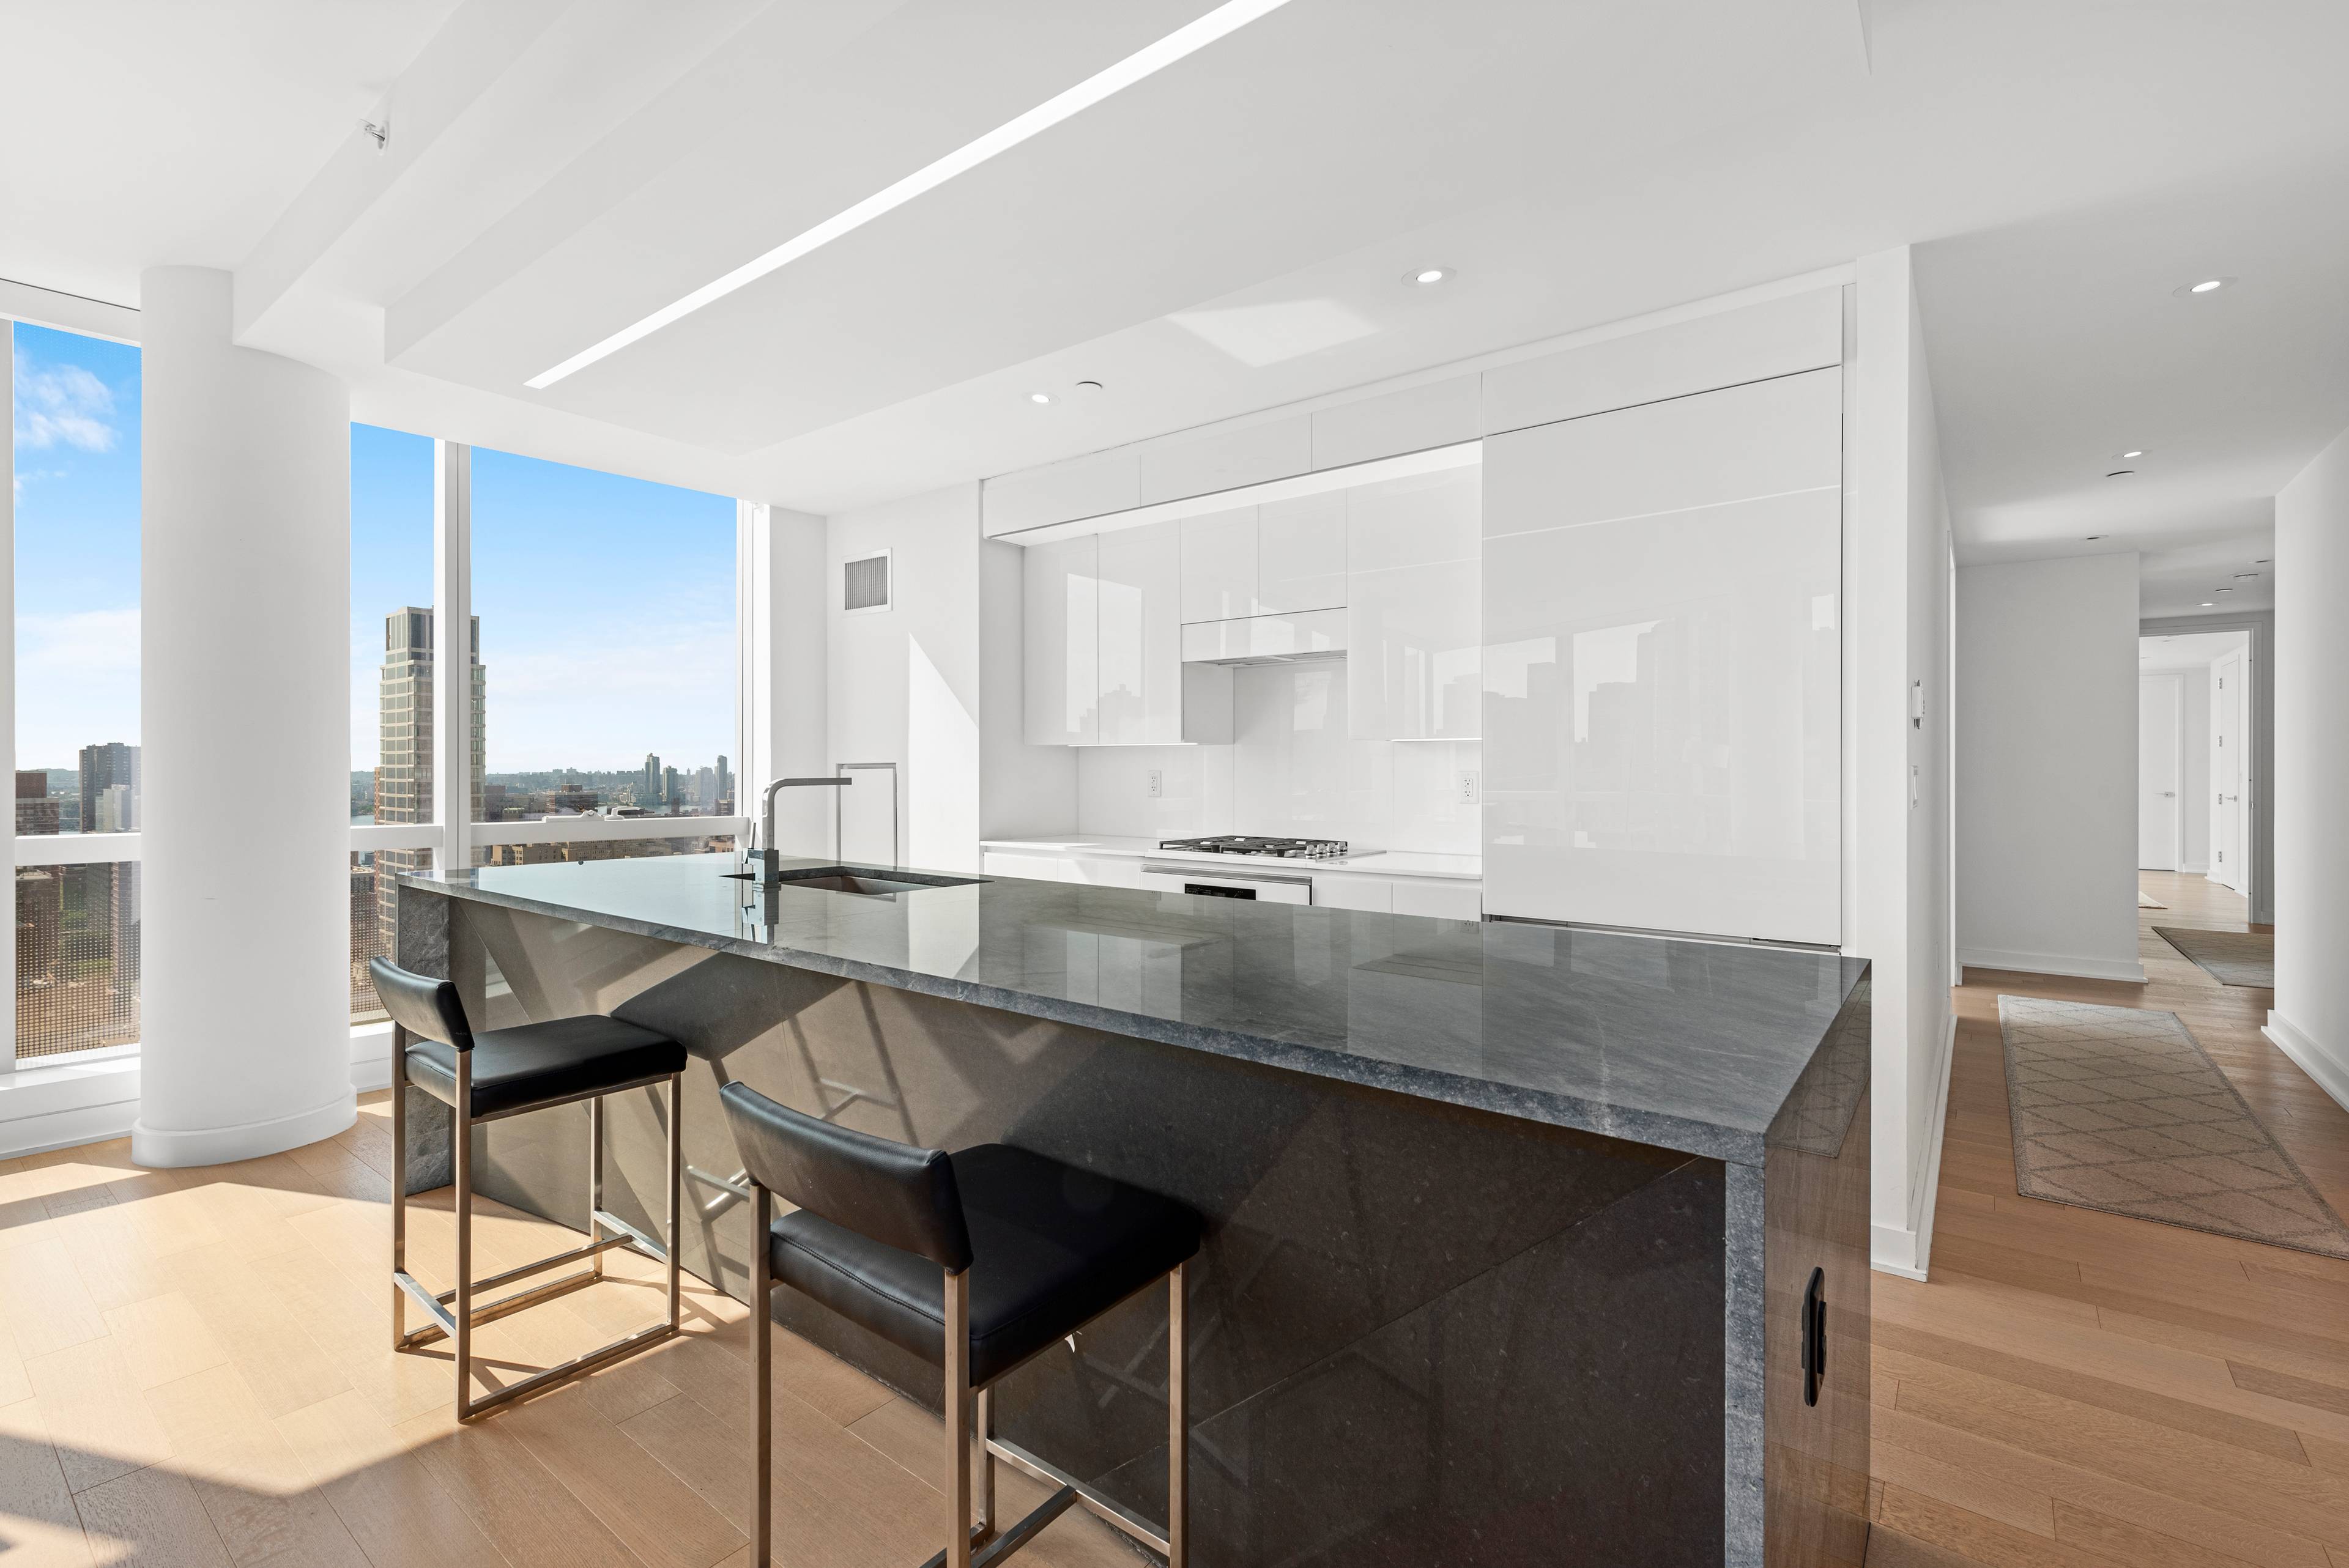 Floor to ceiling skyline city views from this huge newly constructed three bedroom plus study, three full baths.